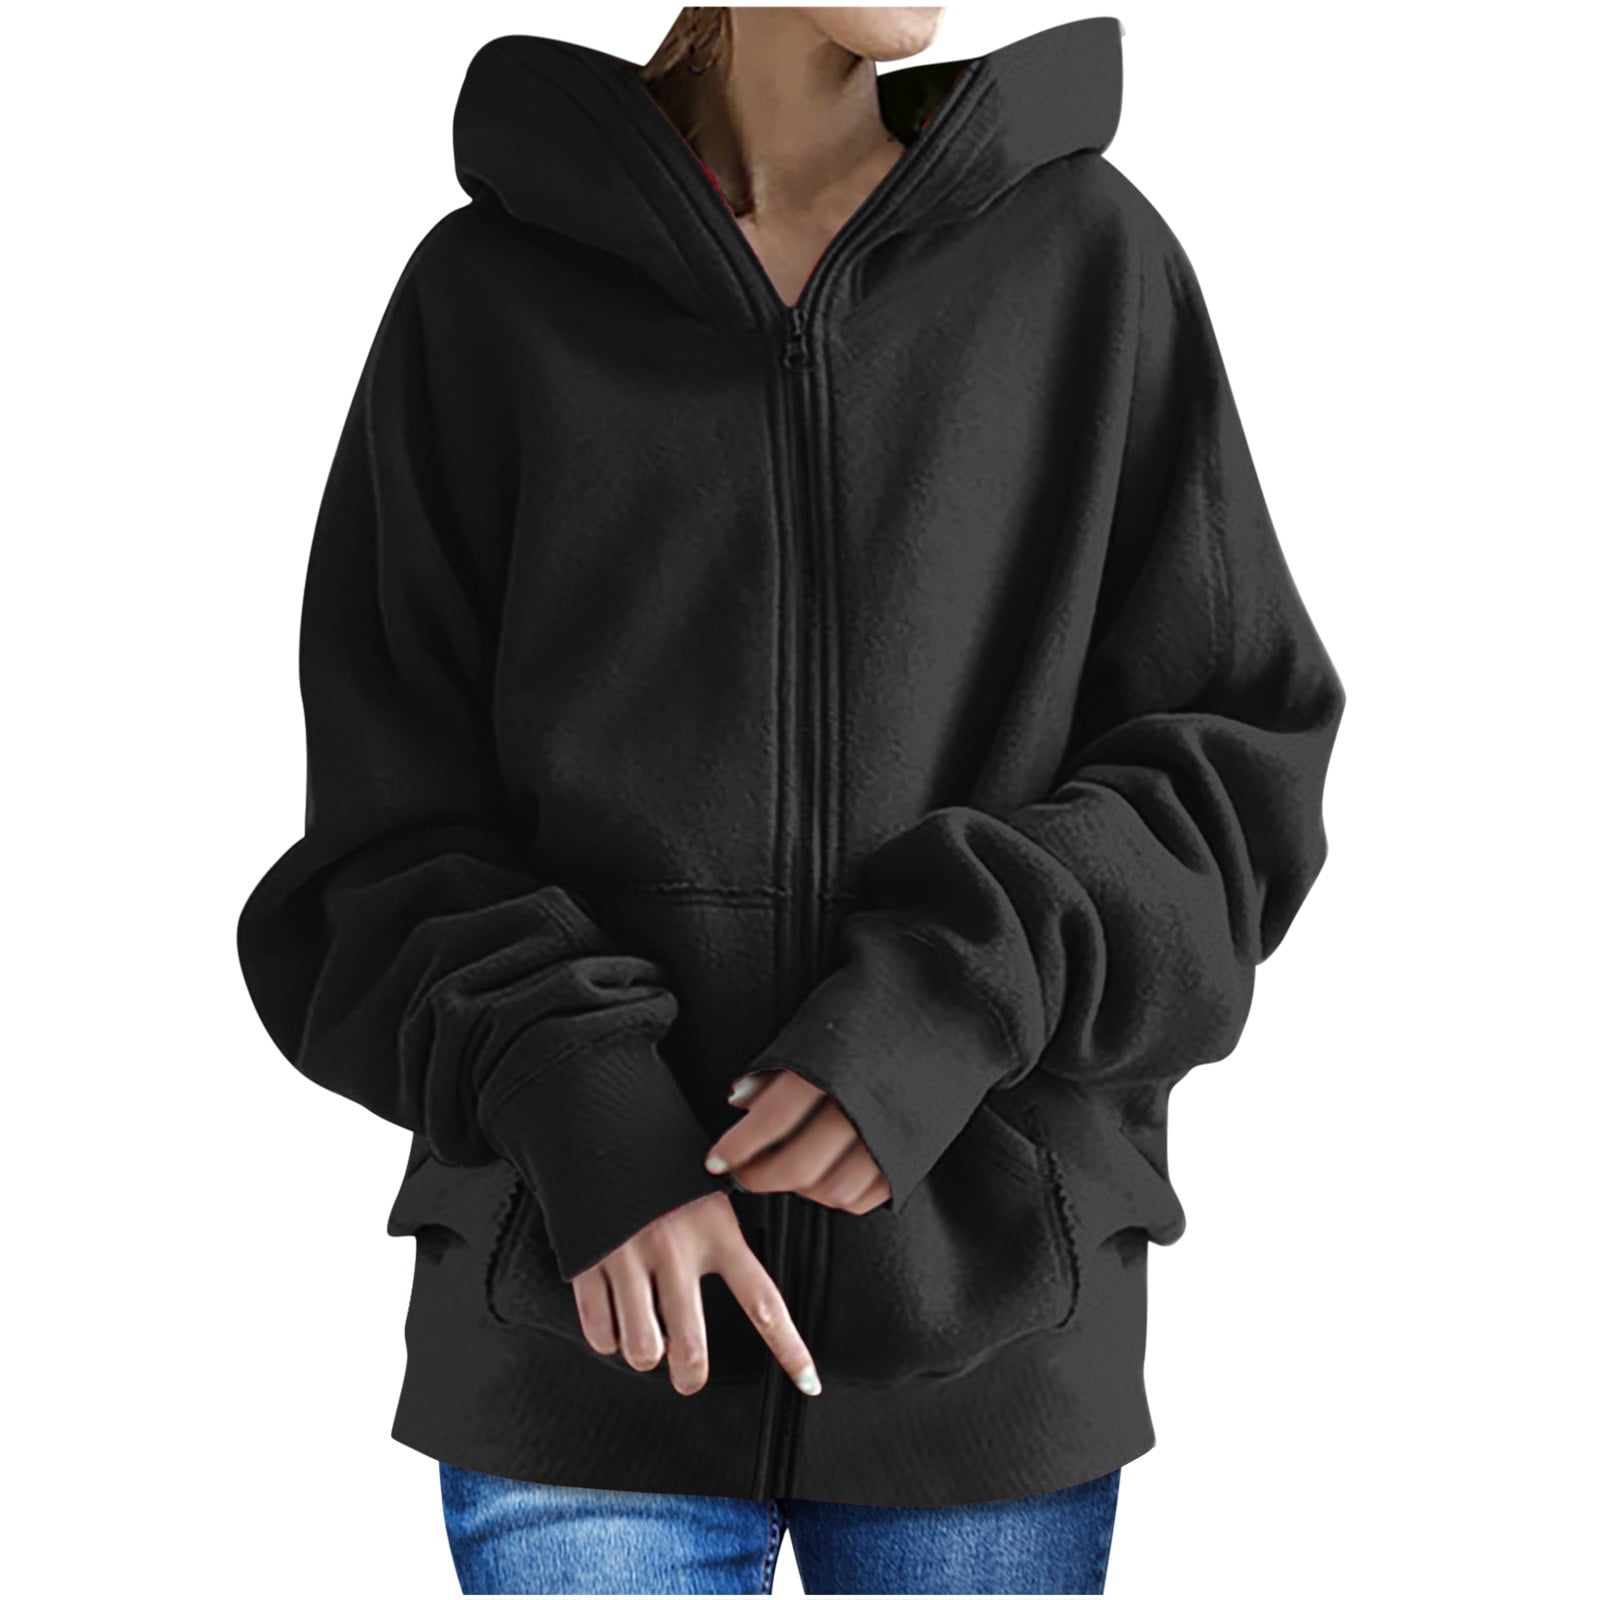  Thin Zip Up Hoodie Women Hoodies For Girls Zip Up Cropped  Hoodie Women Trendy Fall Tops deals of the day really cheap stuff under 50  cents cheap stuff under five dollers 